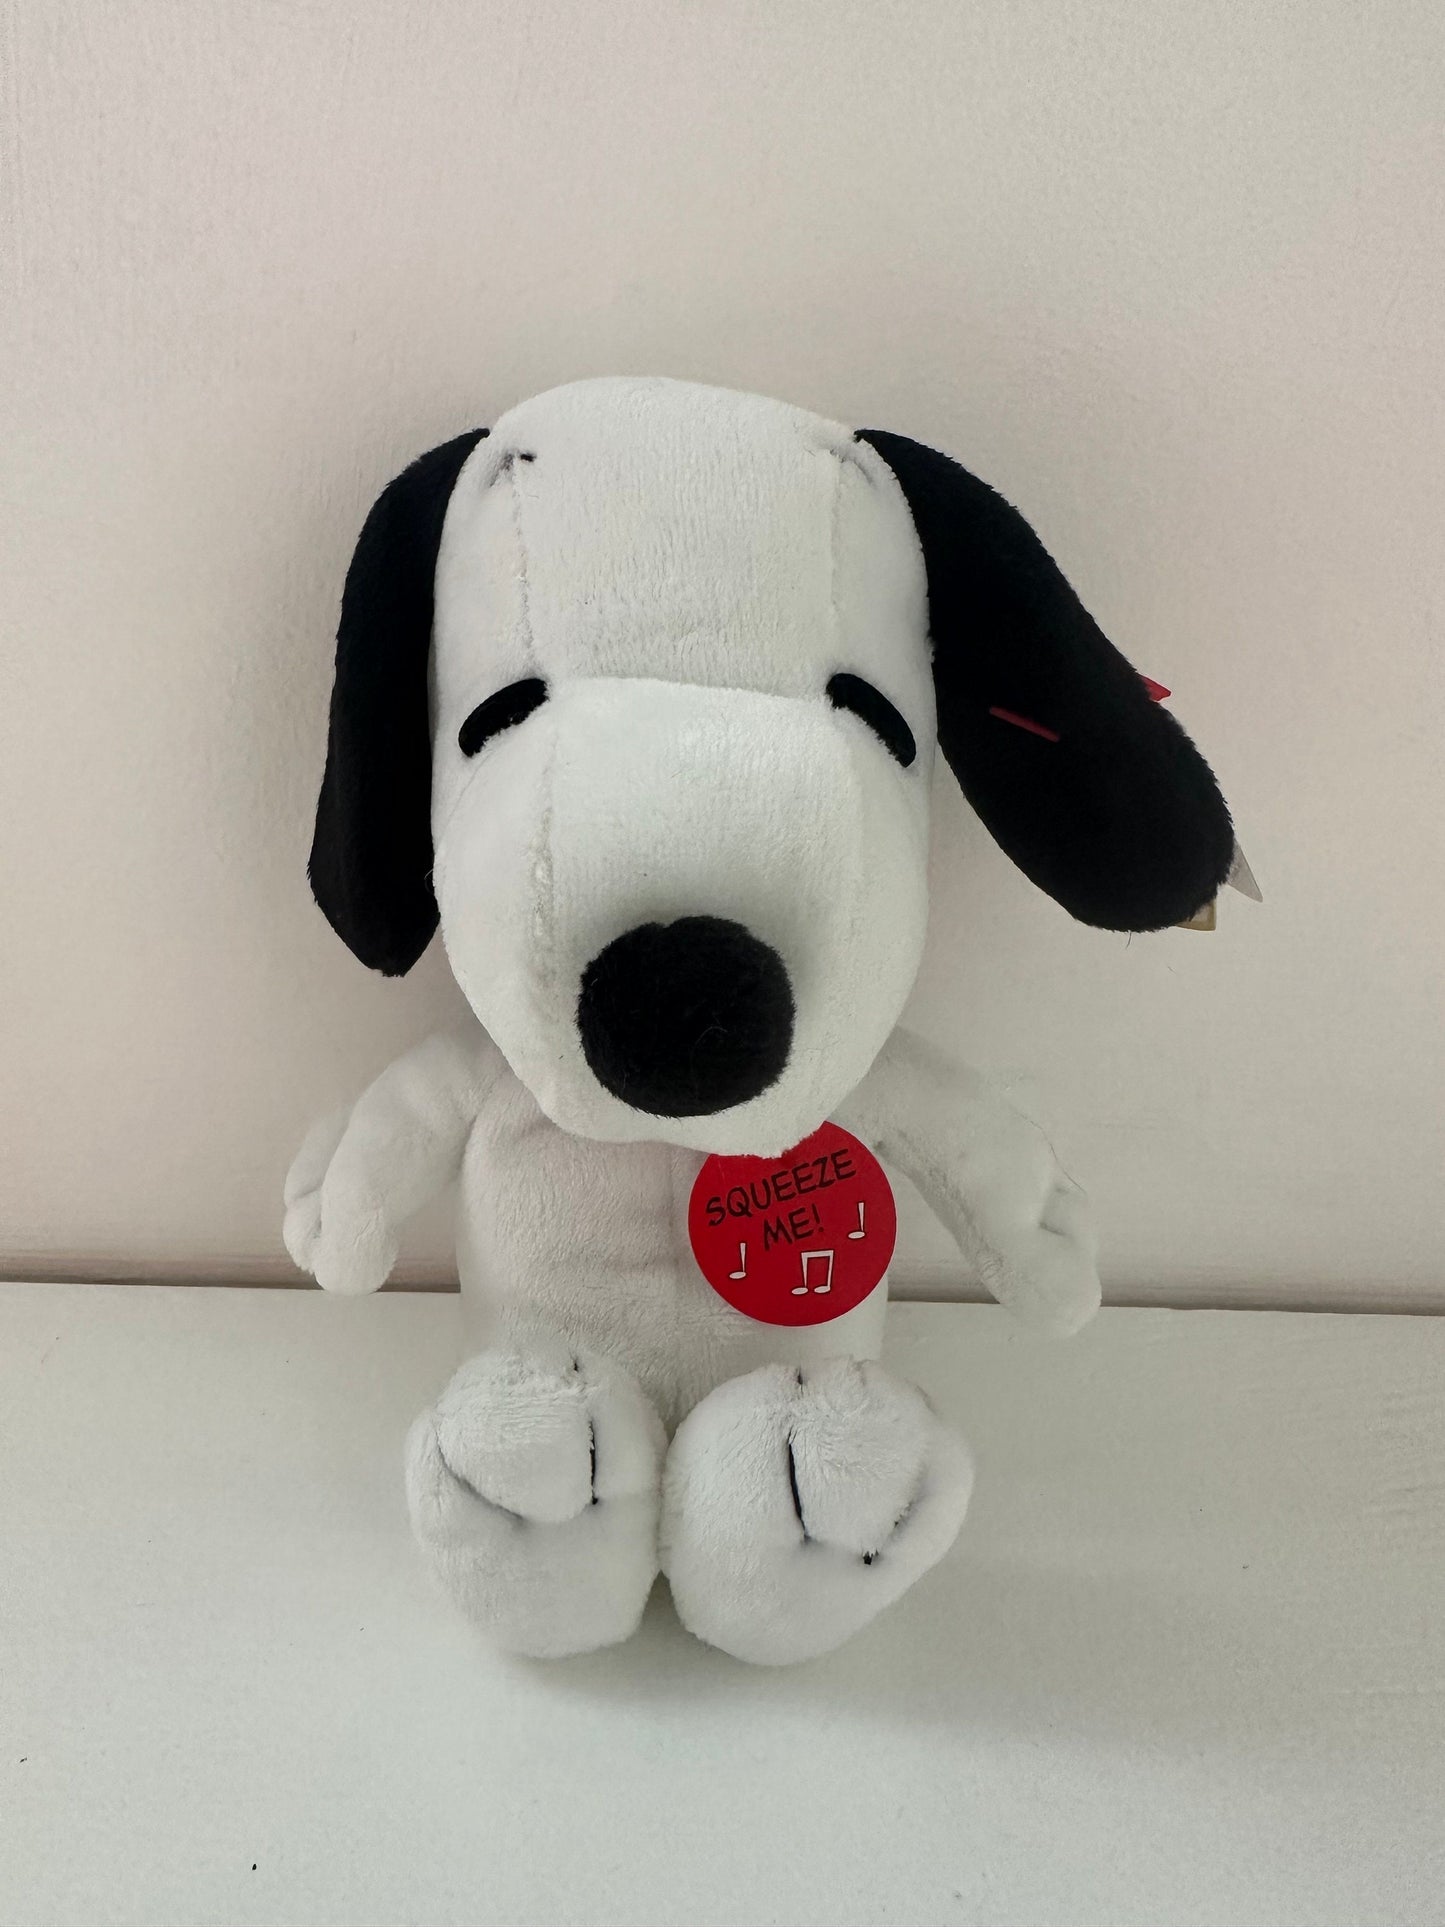 Ty Beanie Baby “Snoopy” the Dog, Character from Peanuts, Music not working (6 inch)